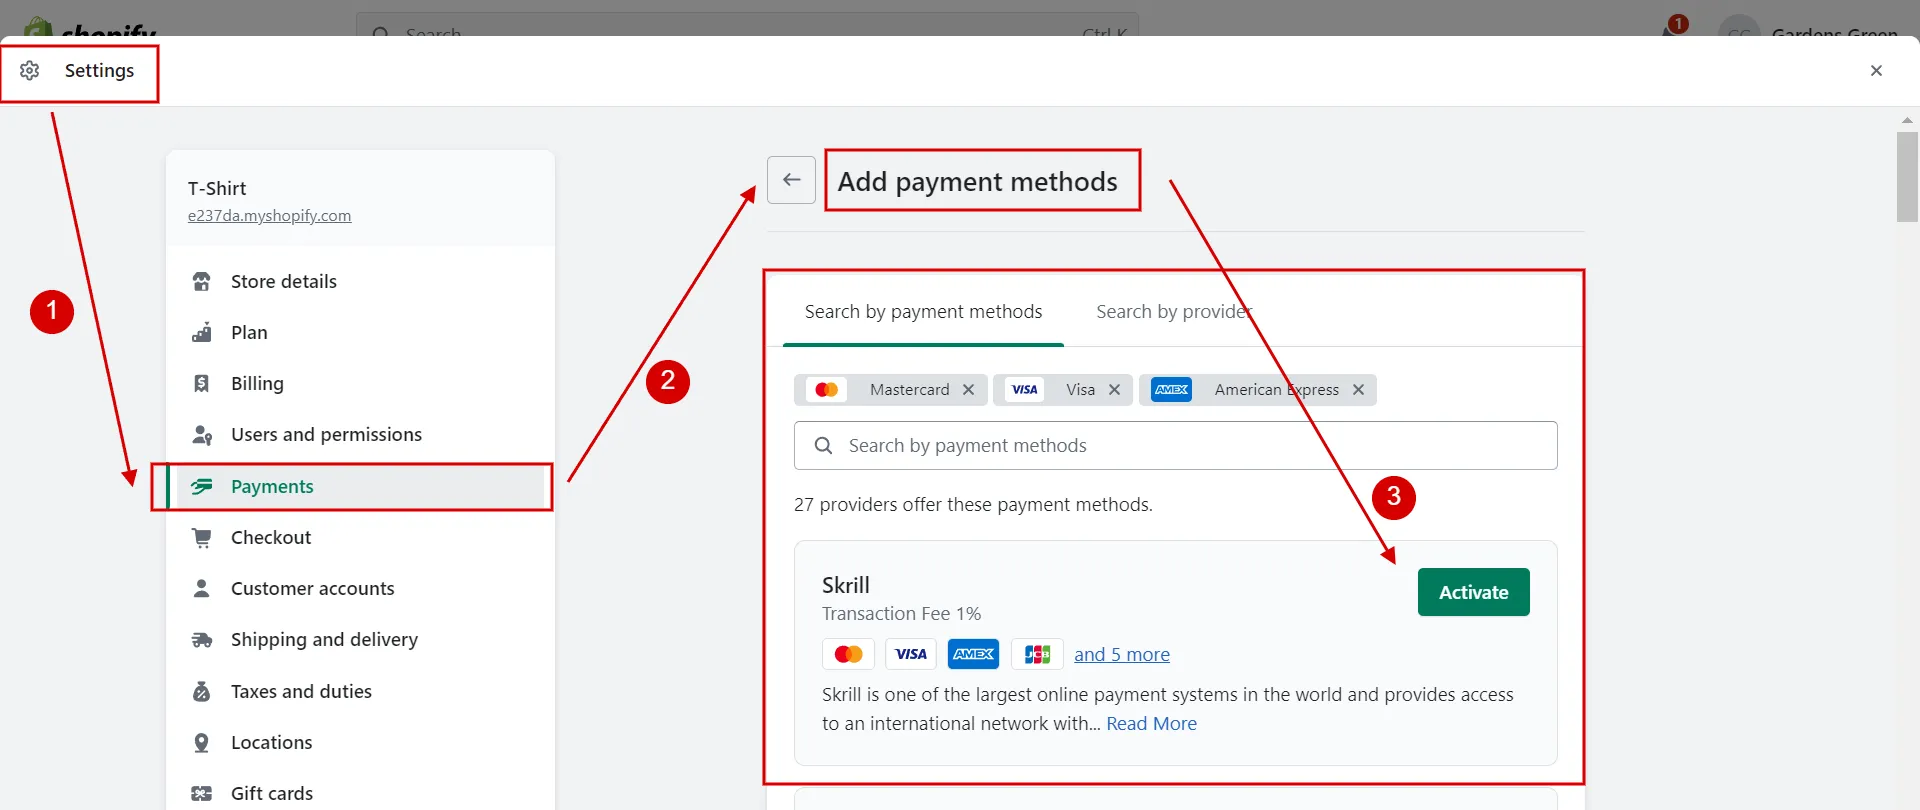 How to increase conversion rate Shopify by adding payment methods